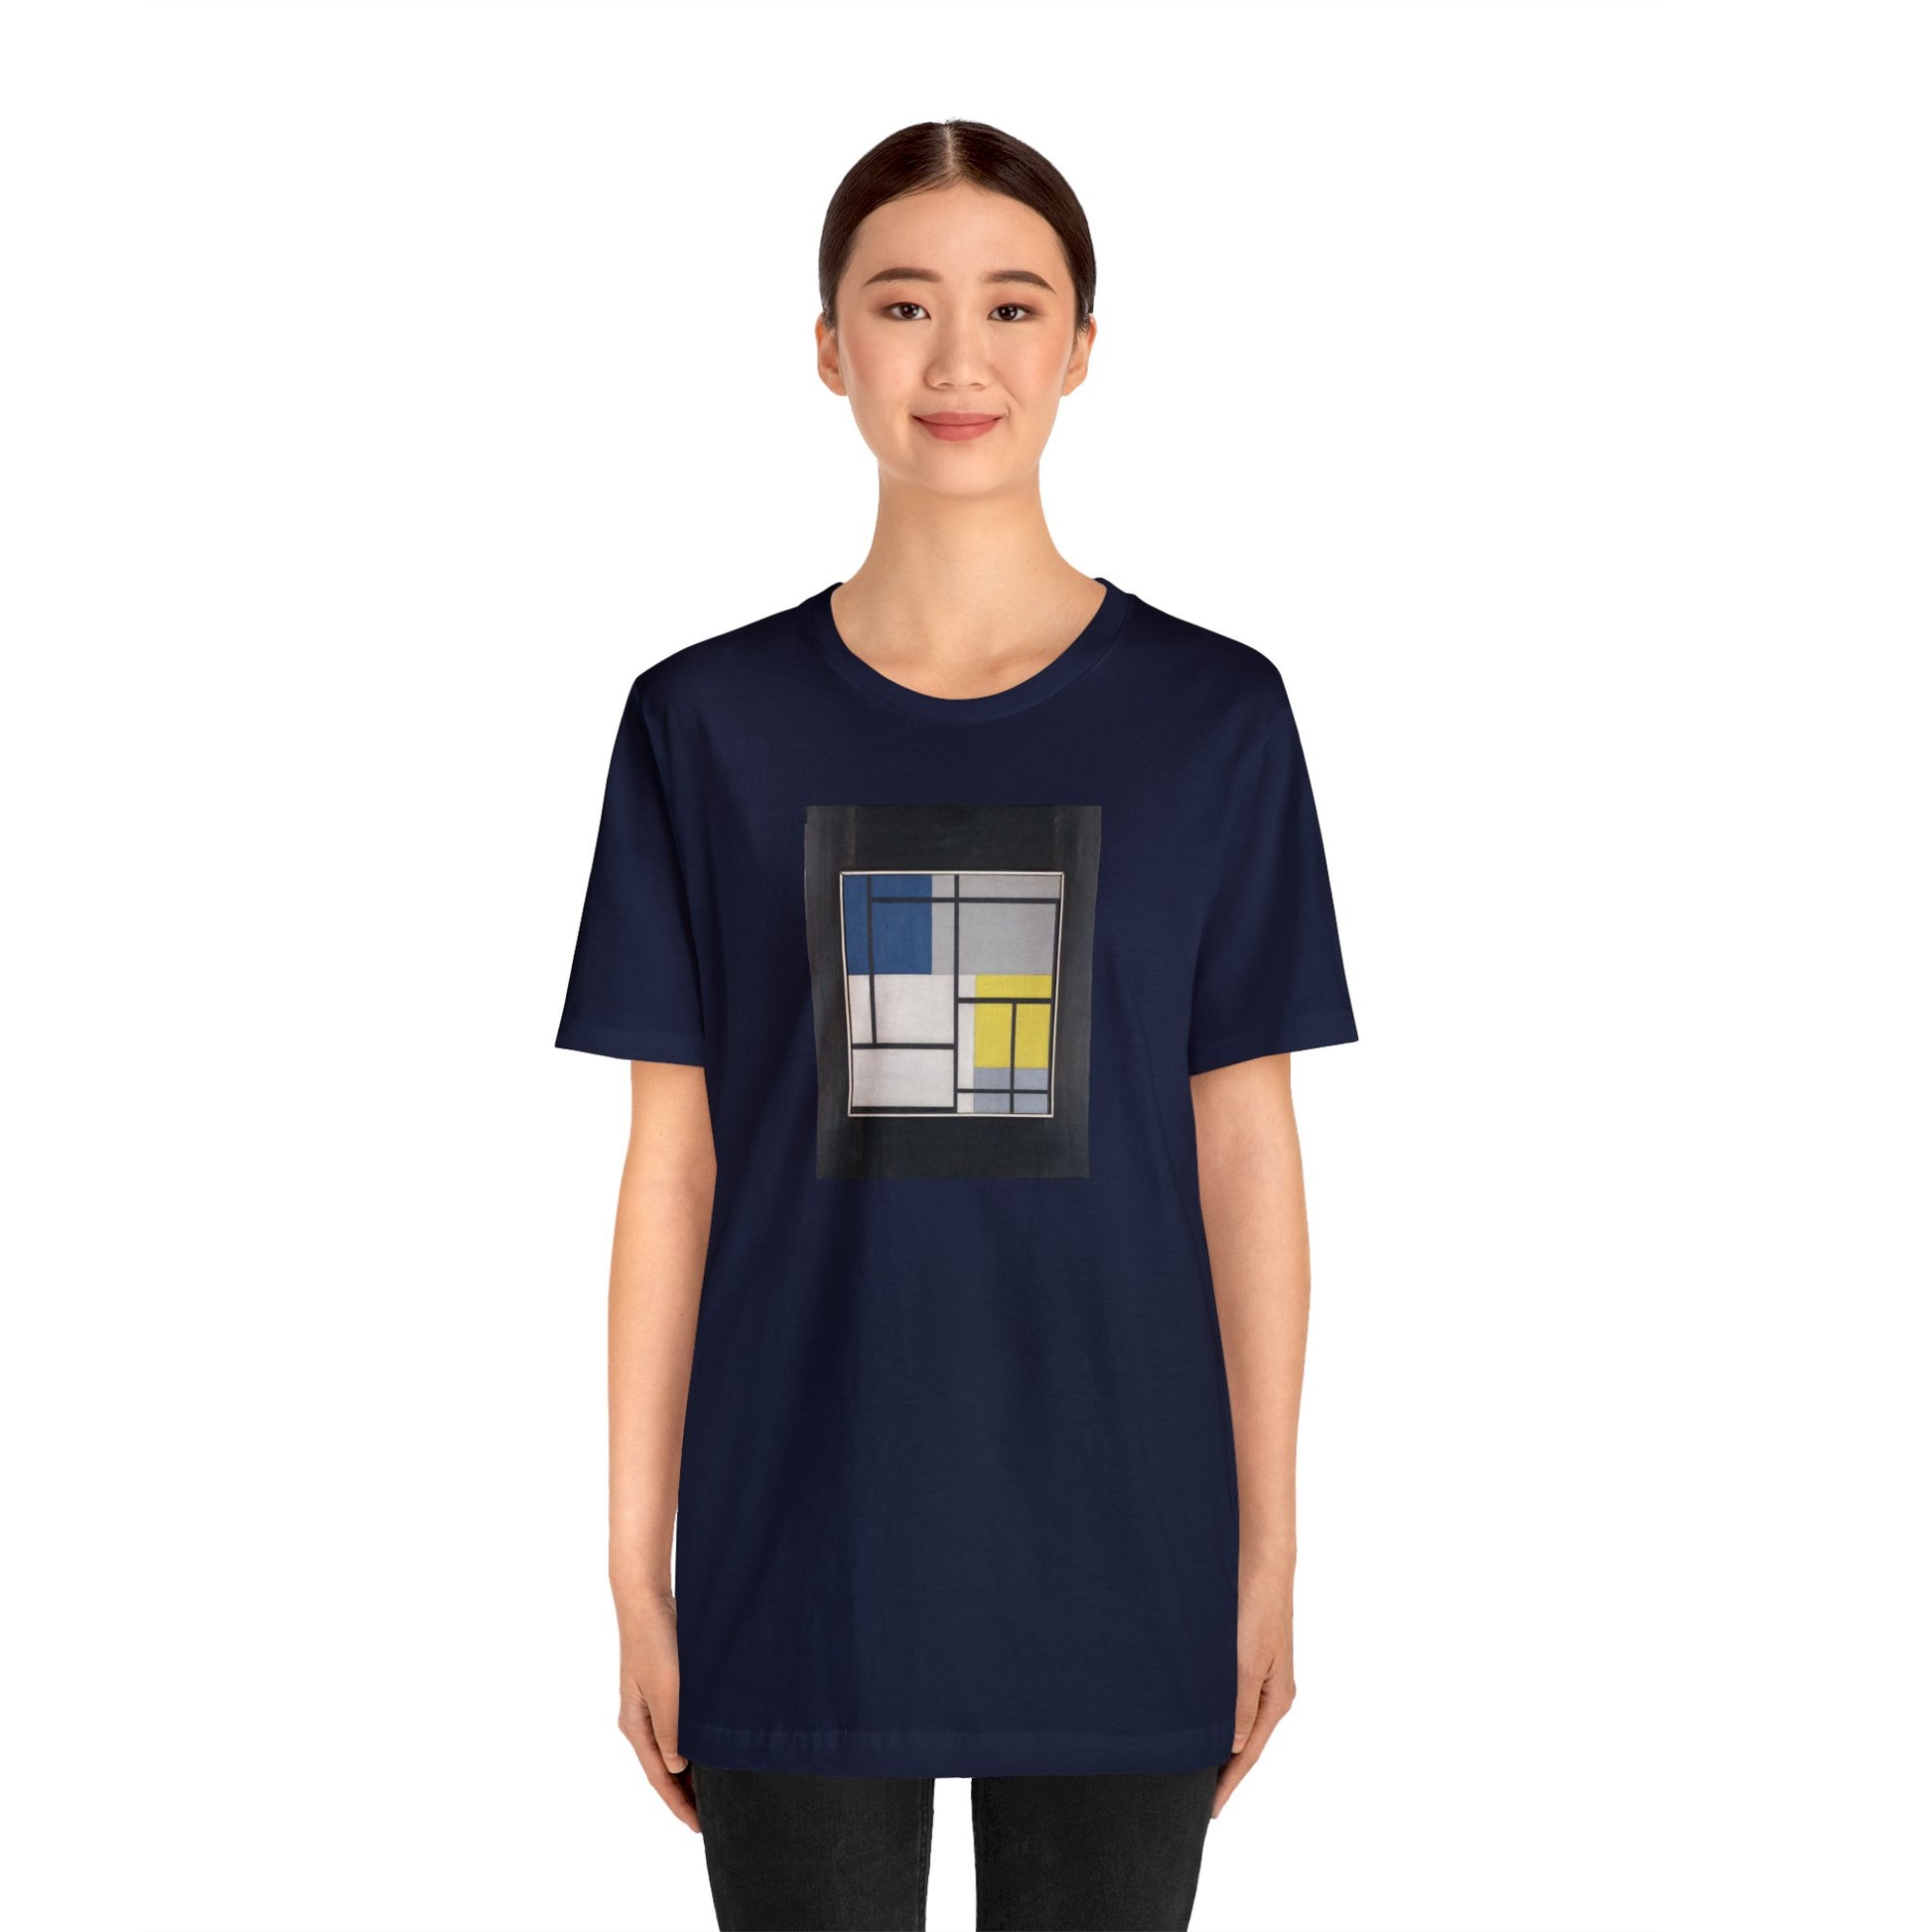 THEOVAN DOESBURG - SIMULTANEOUS COMPOSITION - UNISEX JERSEY T-SHIRT